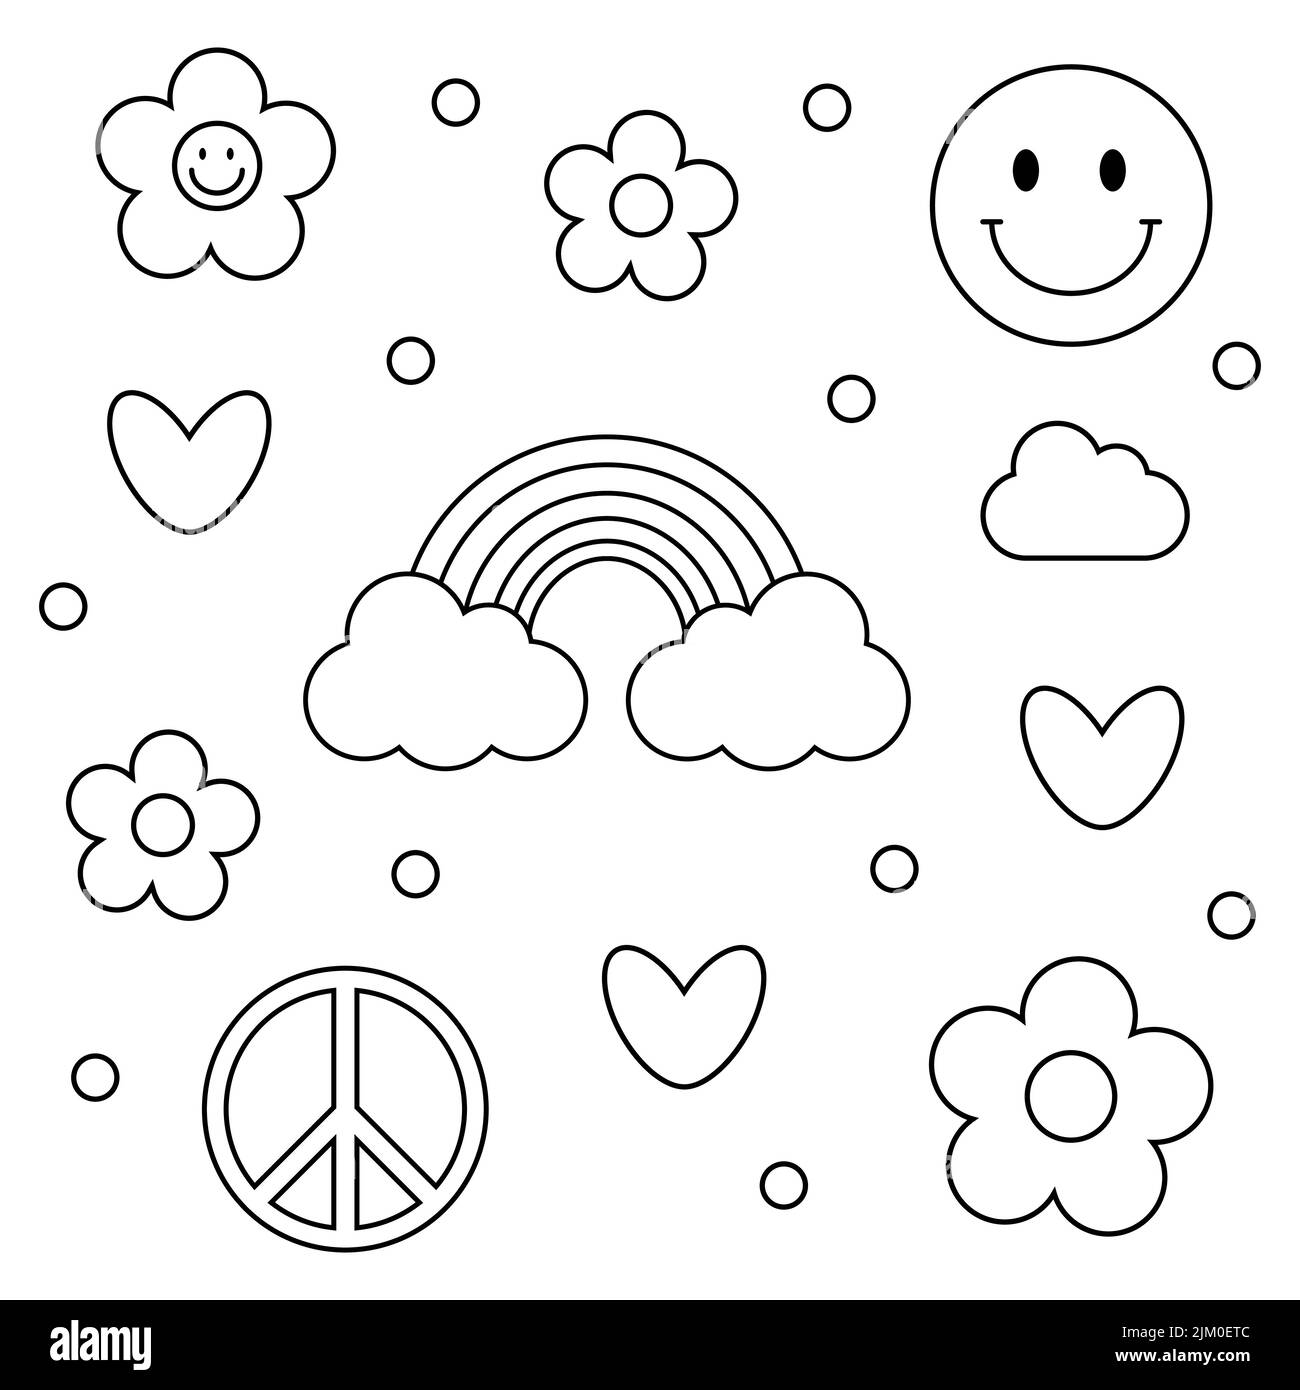 1970 trippy groovy doodle set. Line daisies, hearts, rainbow, smile, peace, cloud on white background. 60s, 70s vibes elements, cartoon stickers. Groo Stock Vector